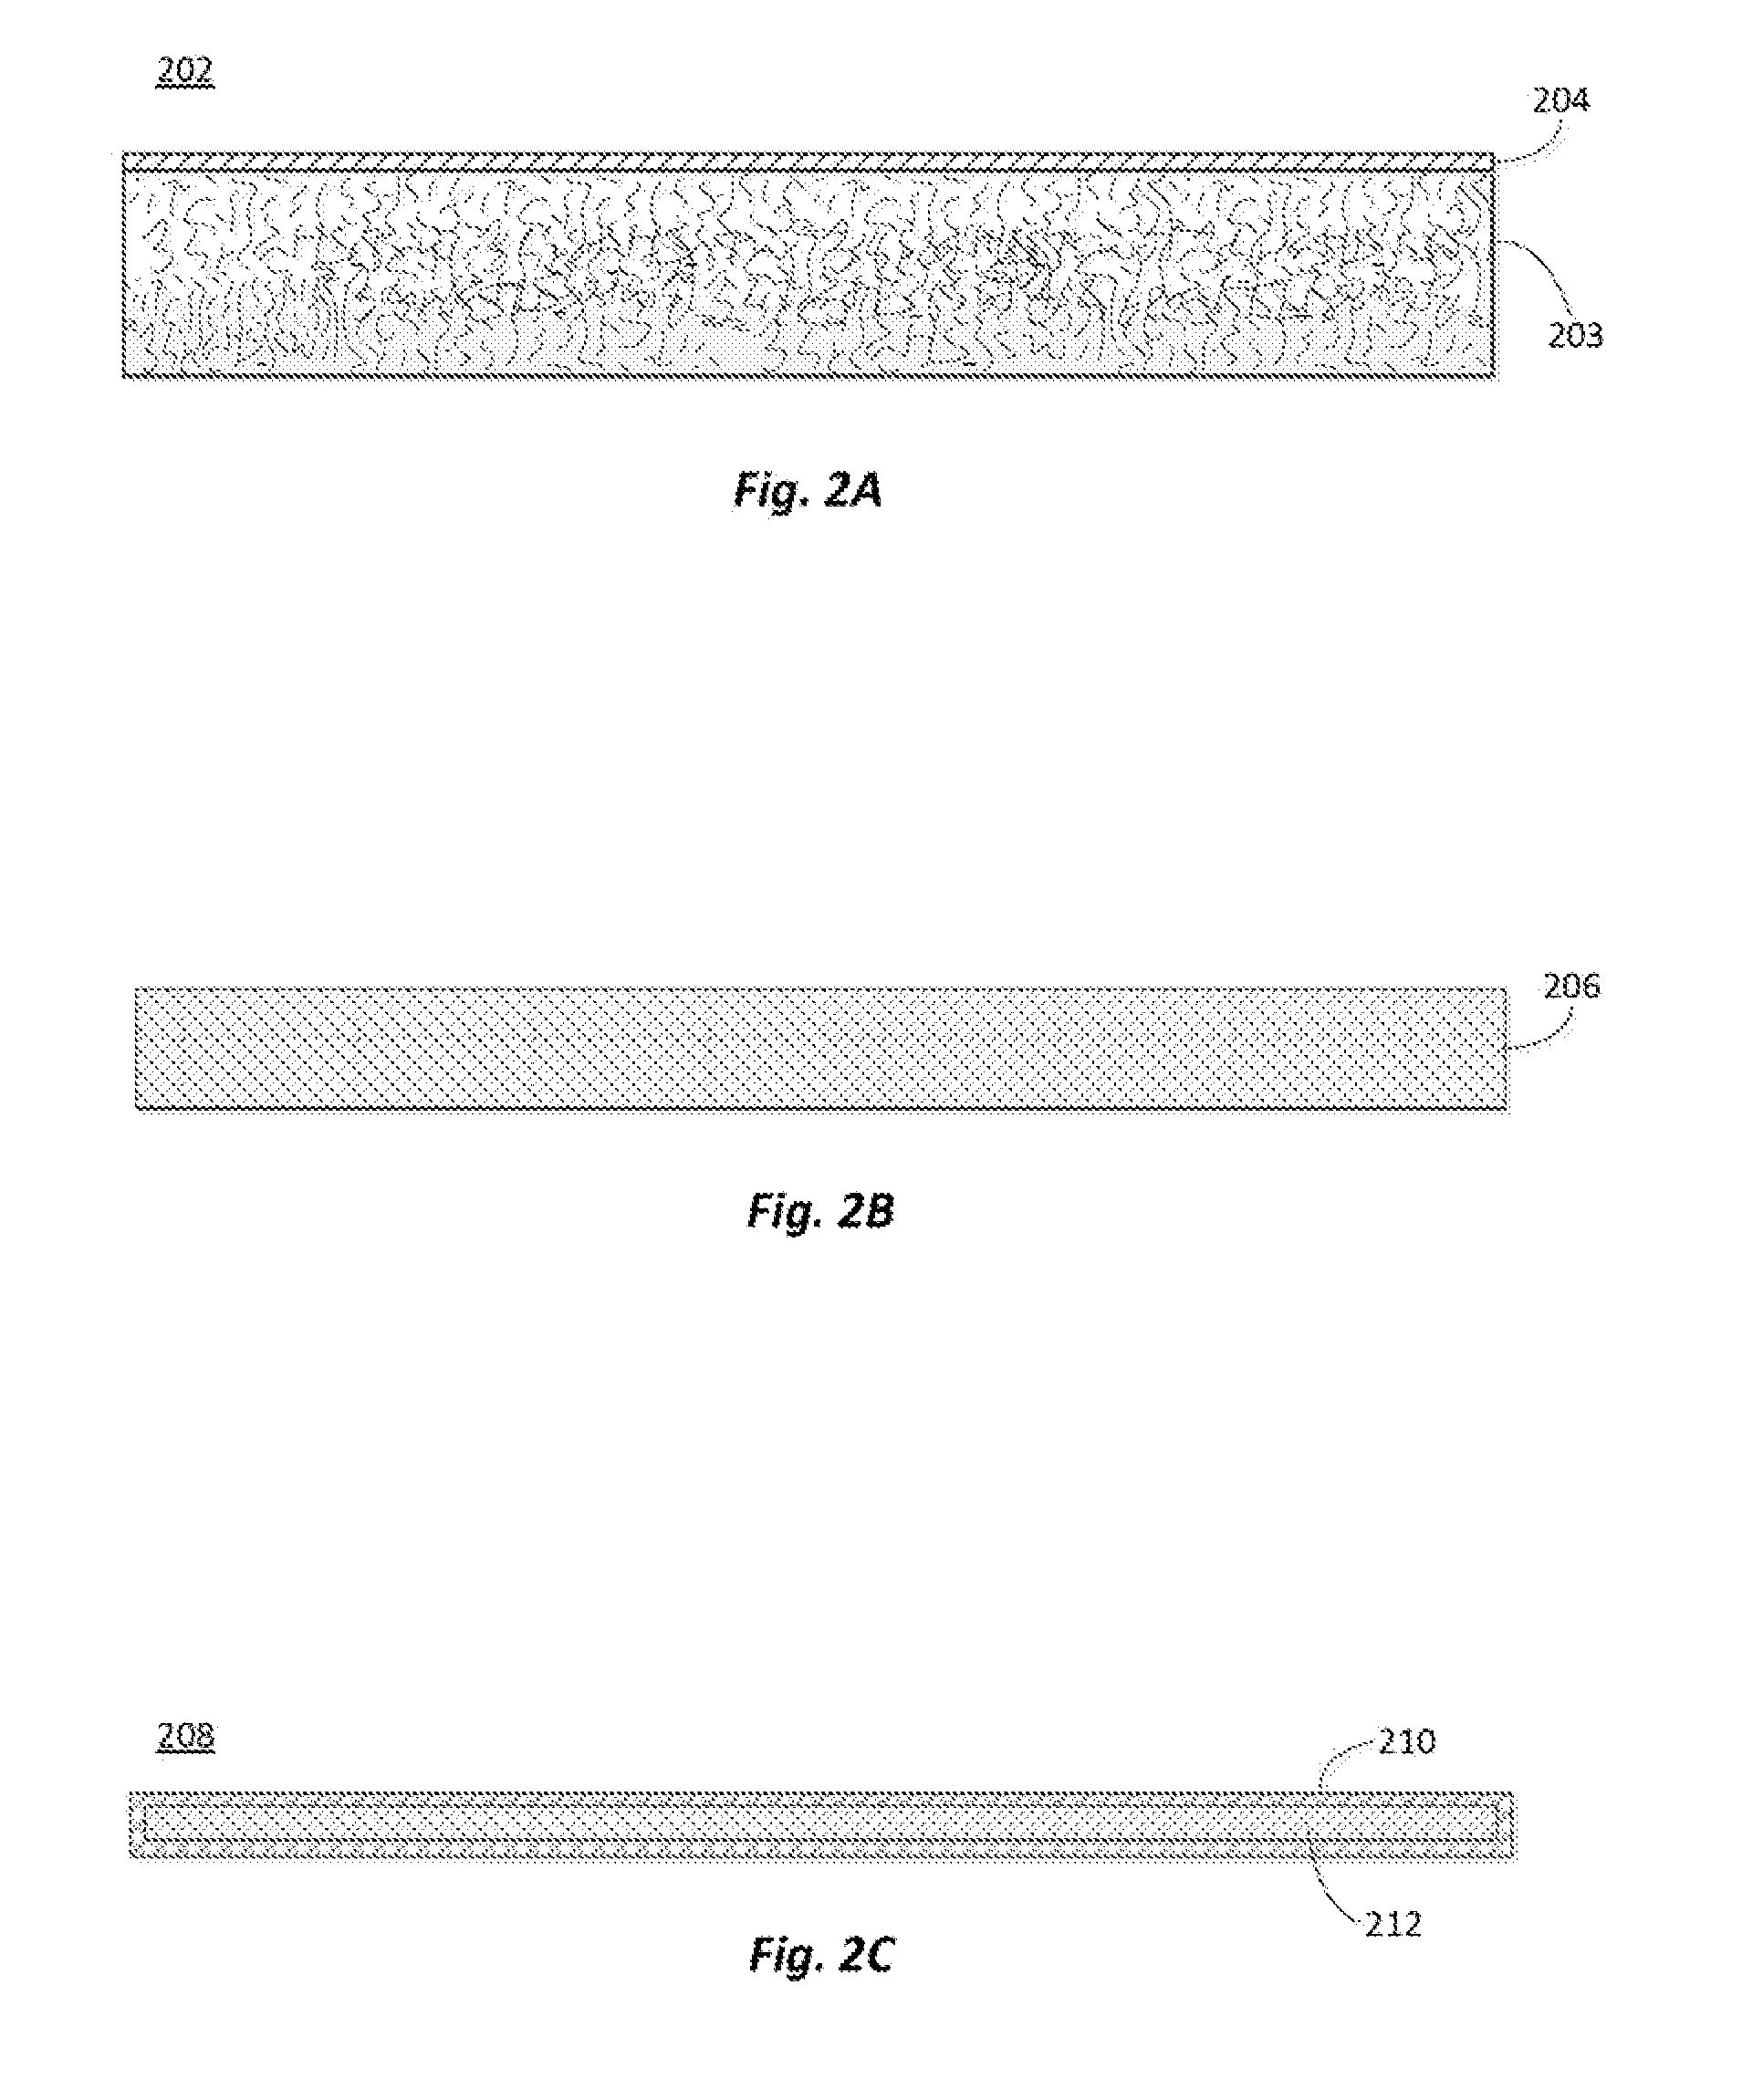 Formaldehyde free binder compositions with urea-aldehyde reaction products